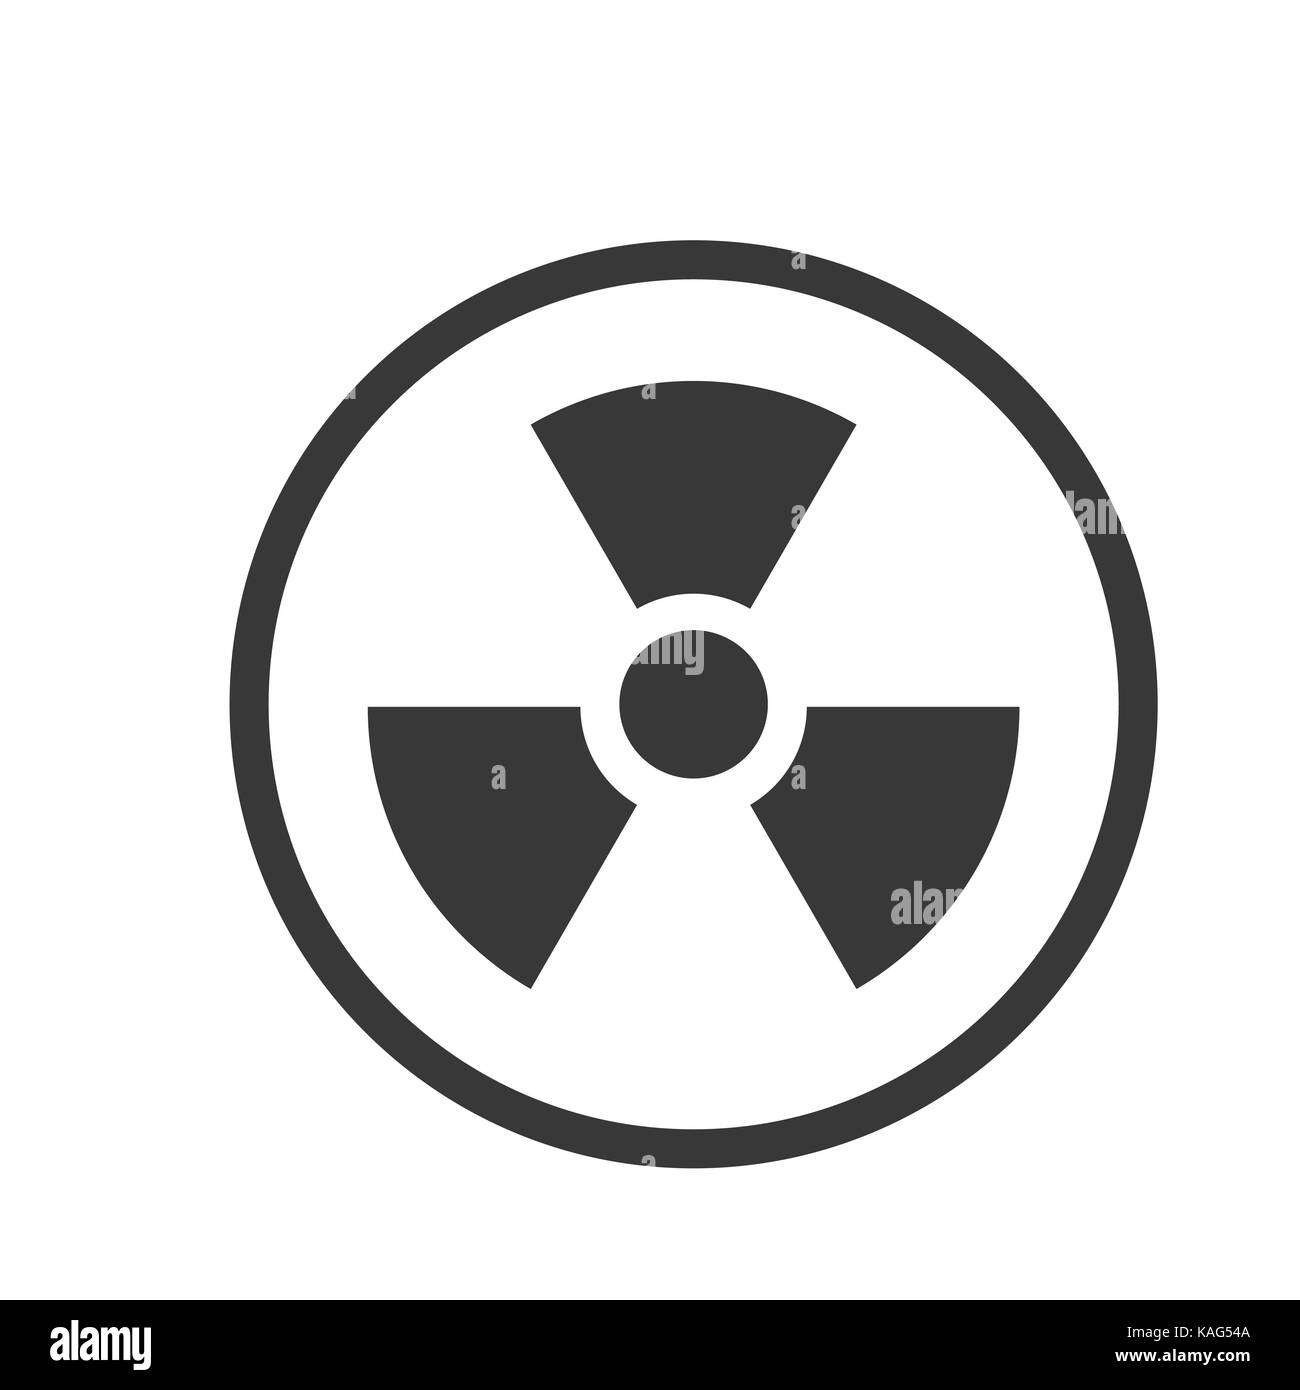 Nuclear icon, iconic symbol inside a circle, on white background.  Vector Iconic Design. Stock Vector